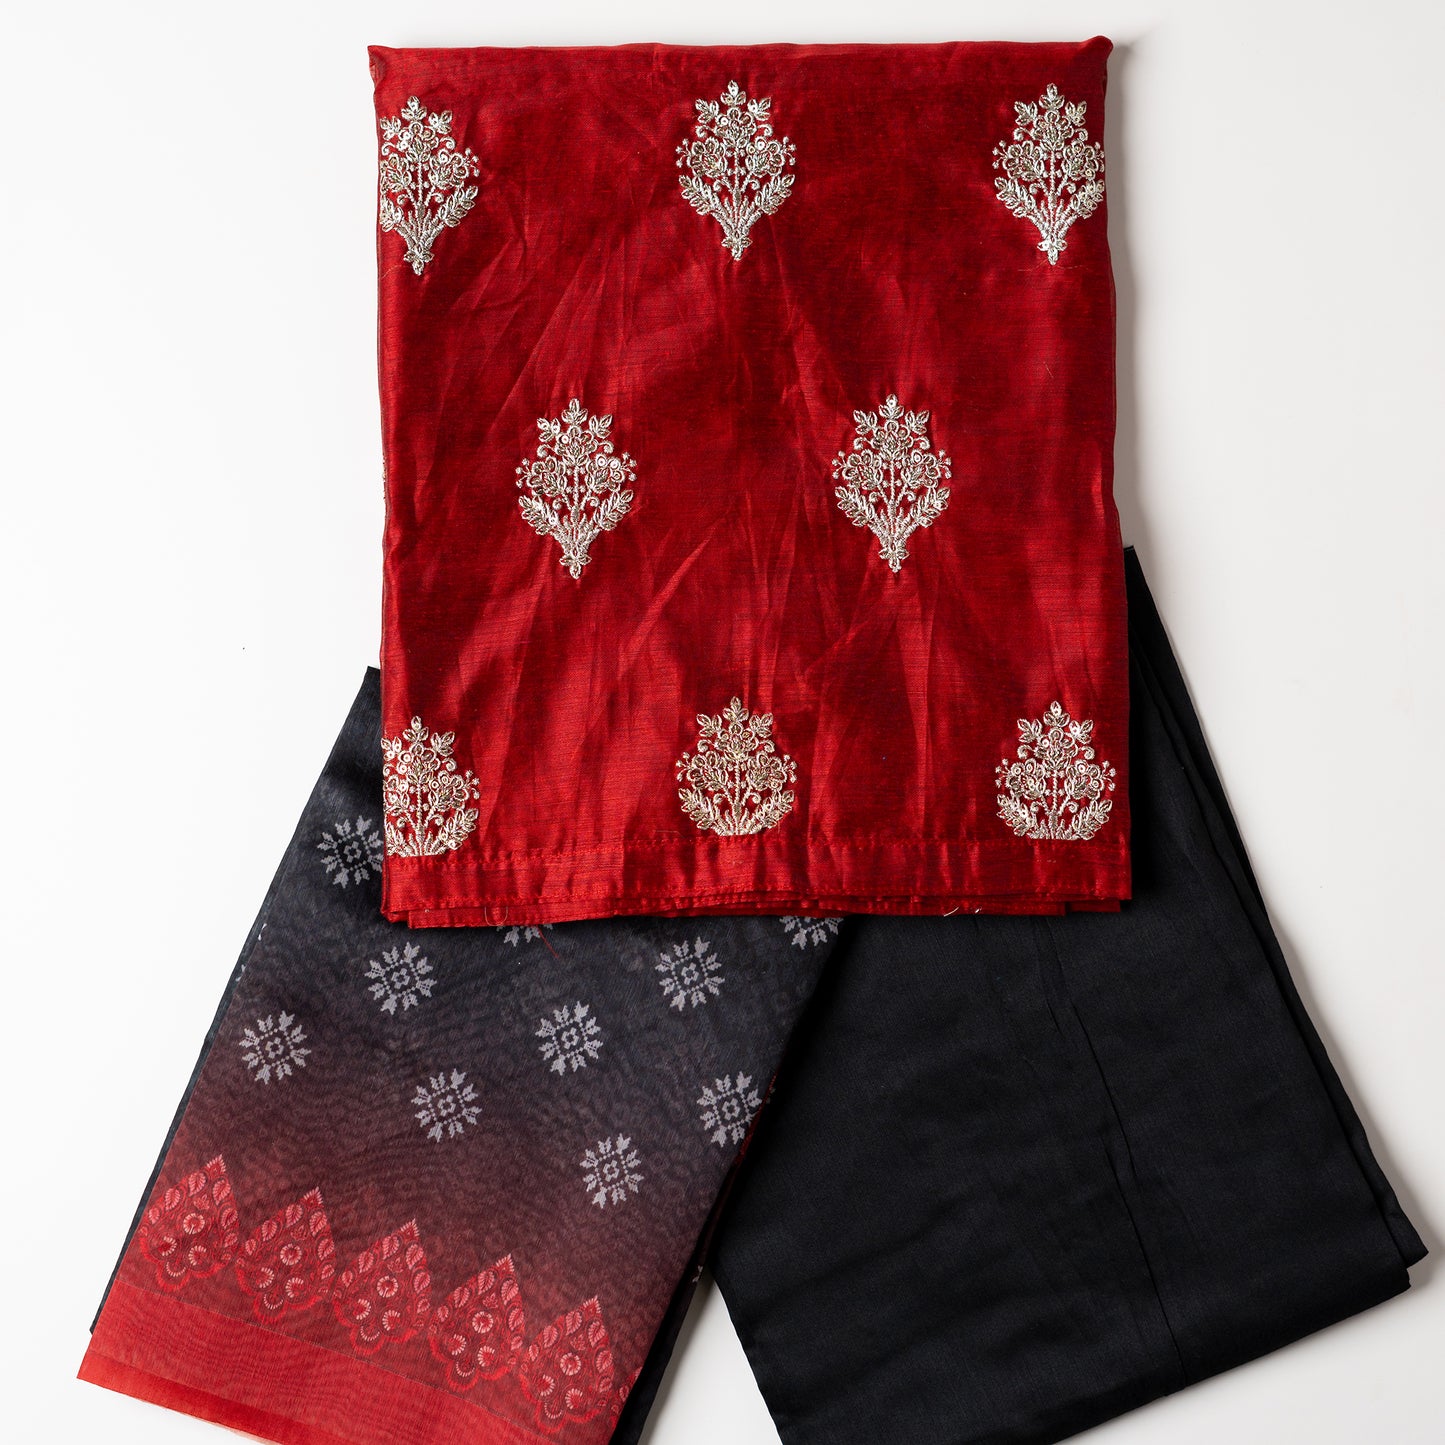 Chanderi silk maroon color top with silver color embroidery work all over the body, silk dupatta with digital prints, cotton silk black color bottom 